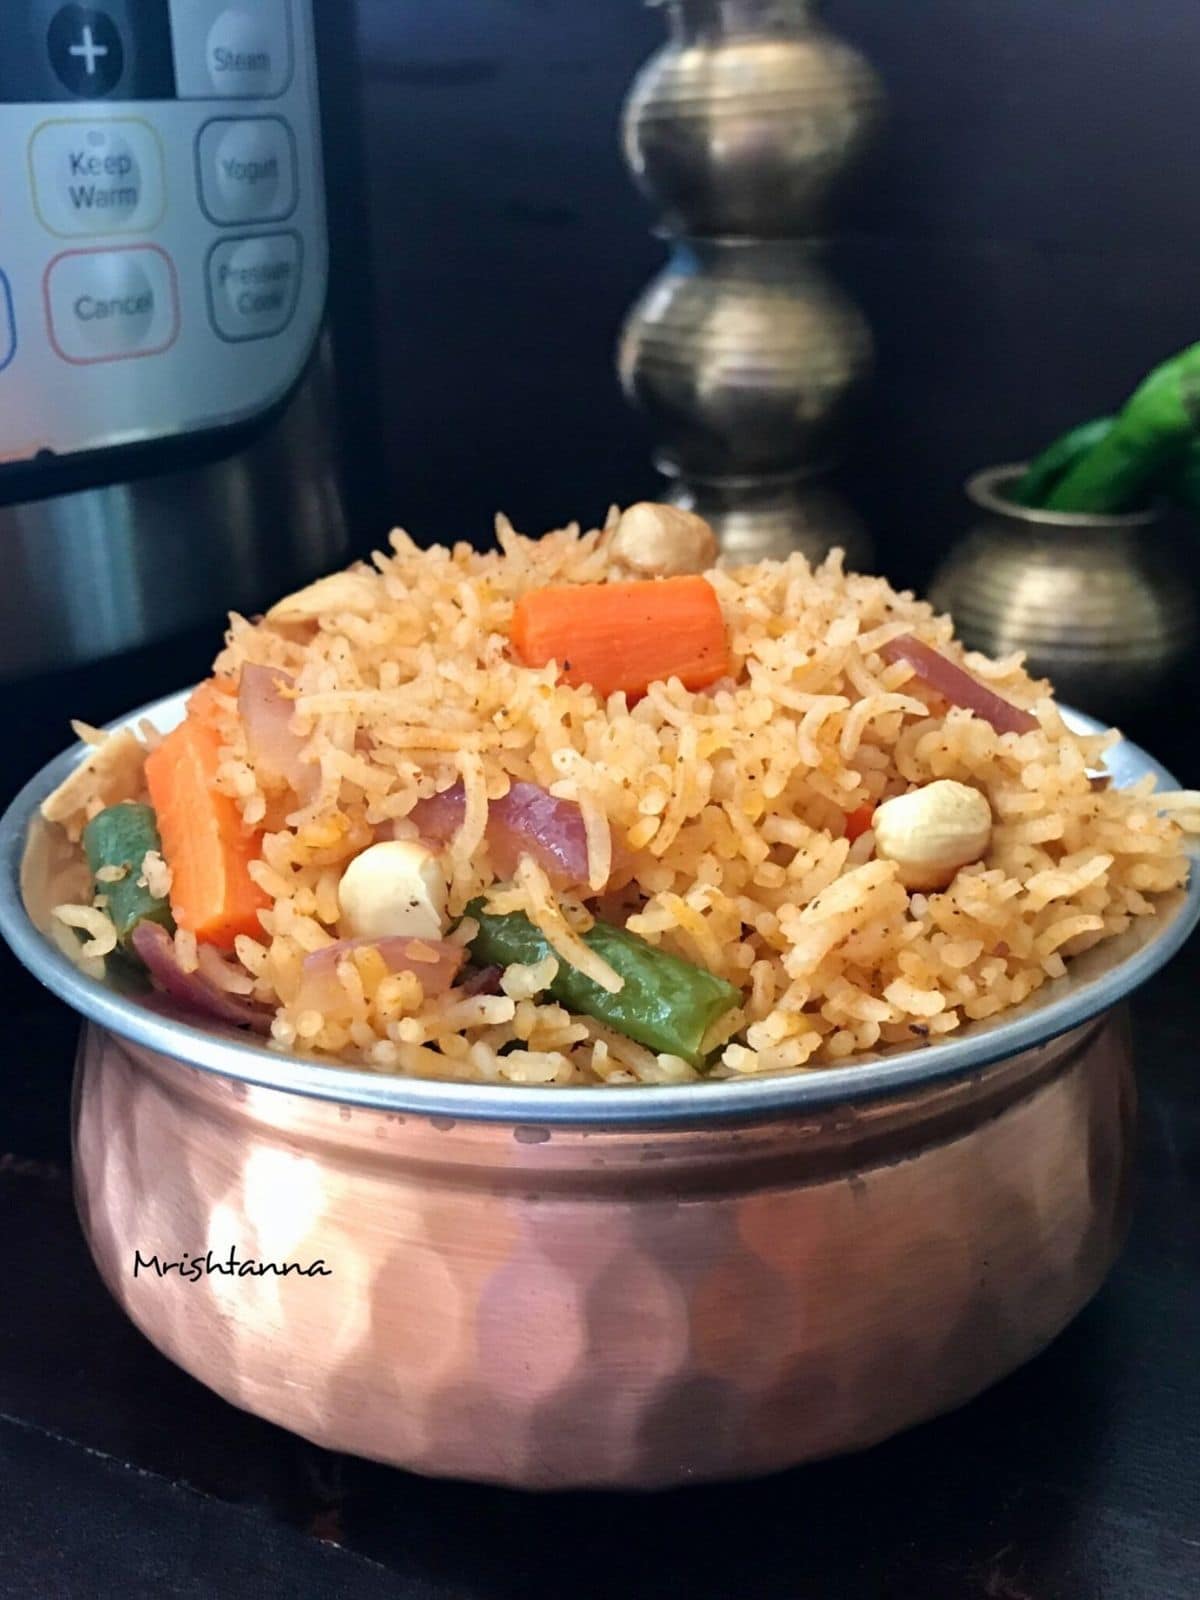 A pot is filled with vegetable pulao and placed on the black table